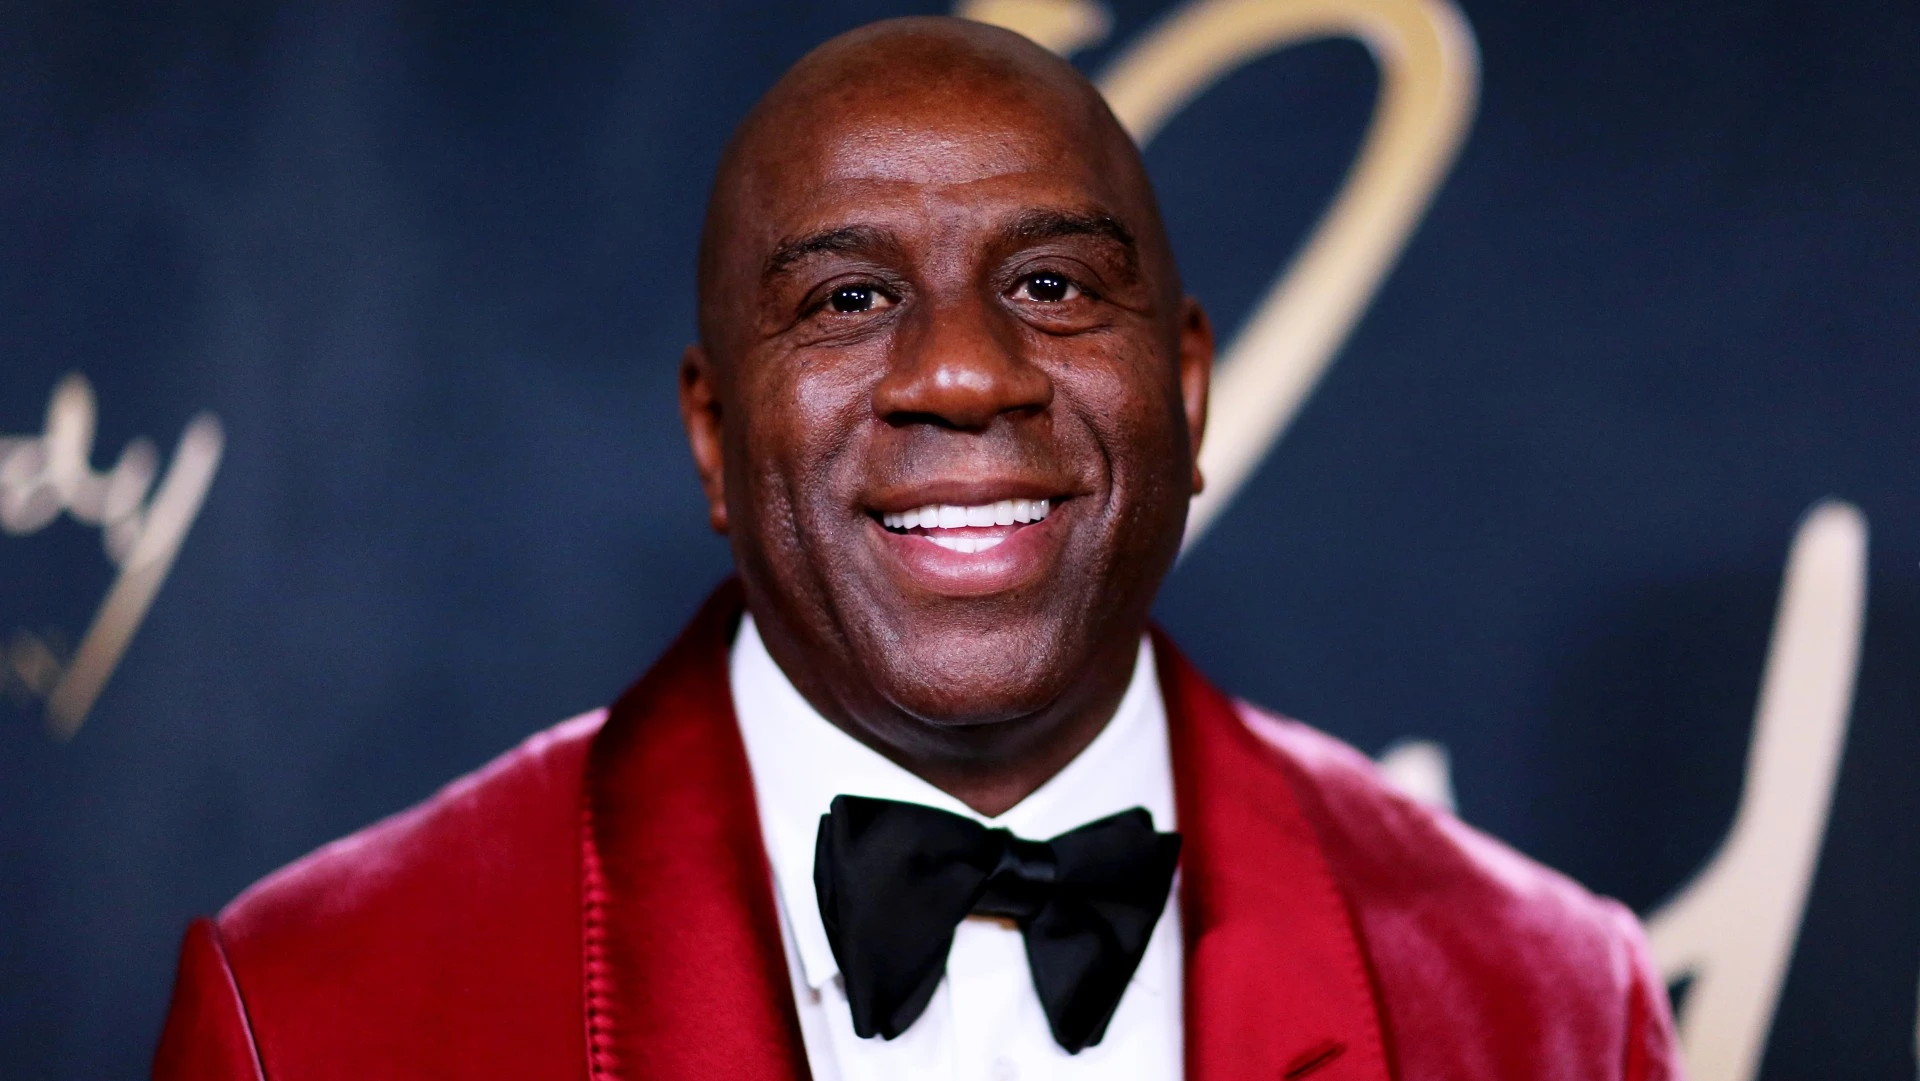 Magic Johnson wearing a red suit